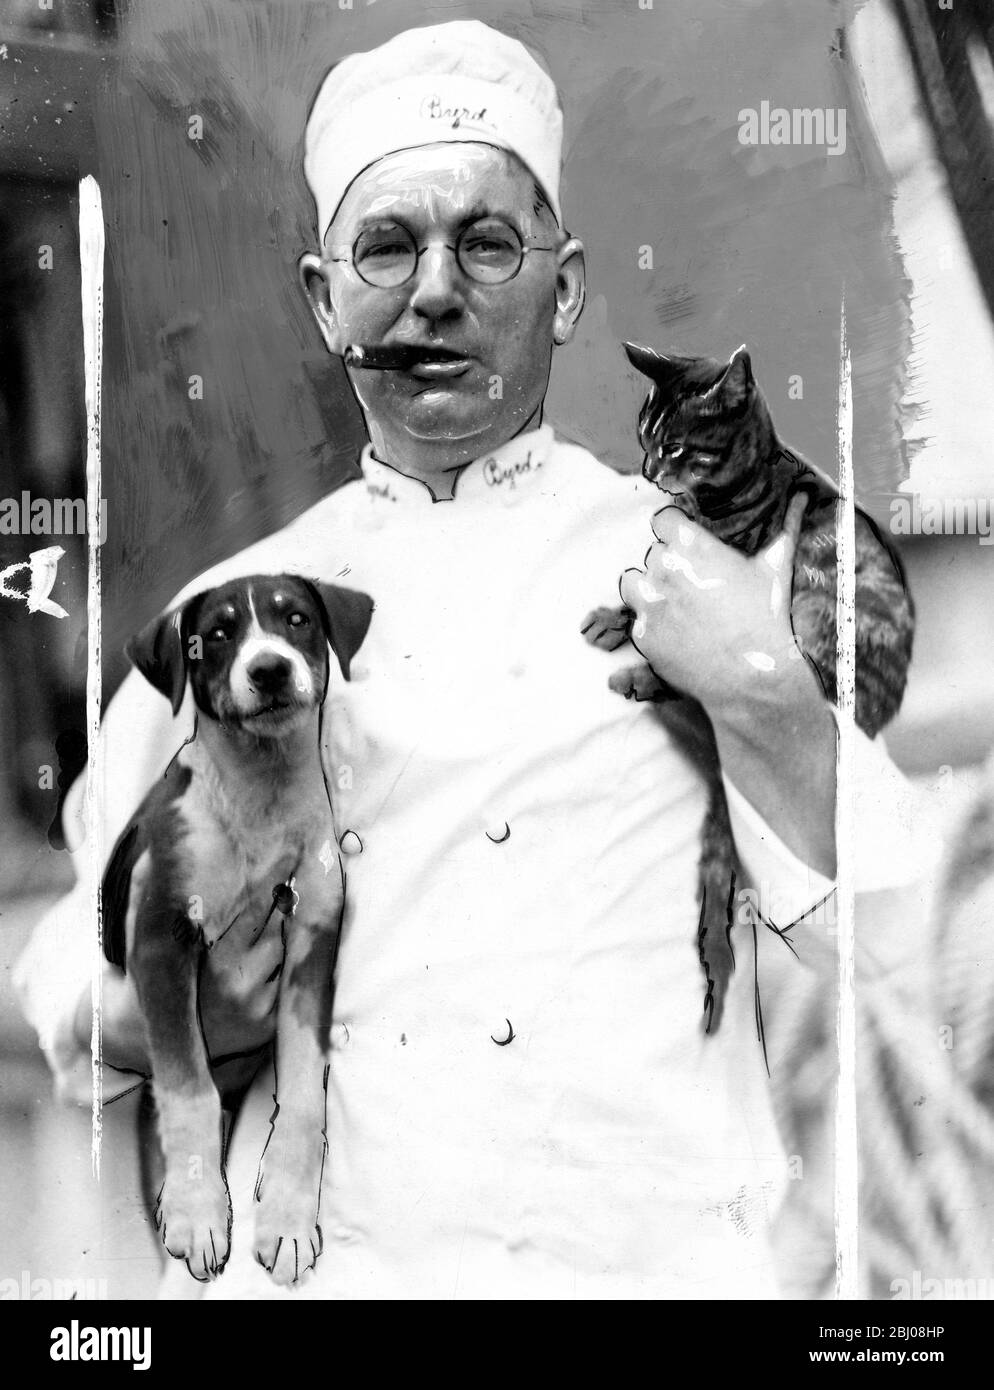 George W.Tennant, a member of the Byrd Antarctic Expedition, pictures with the cat and dog mascots of the city of New York Byrd ship that shipped for the South Polar Regions. Photographic expeditions and geological surveys were taken during the expedition. - 1928 Stock Photo